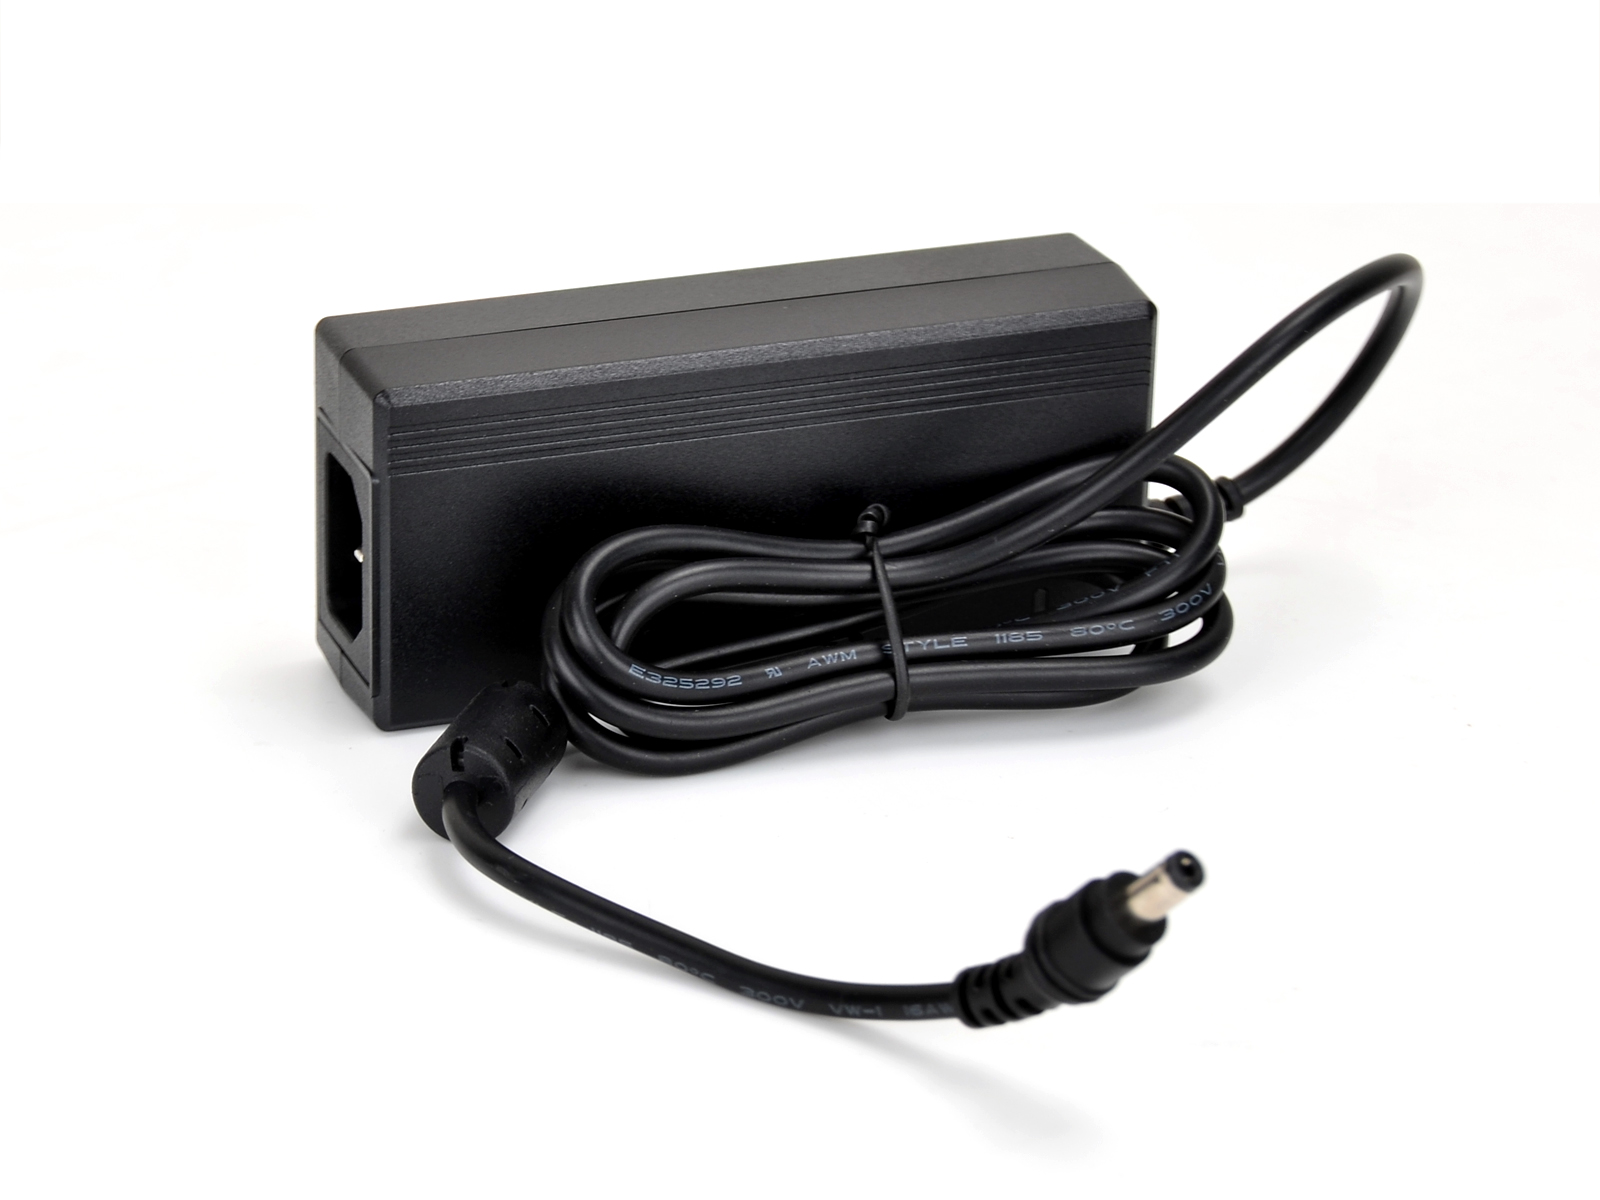 12V 60W AC Adapter Featured Image